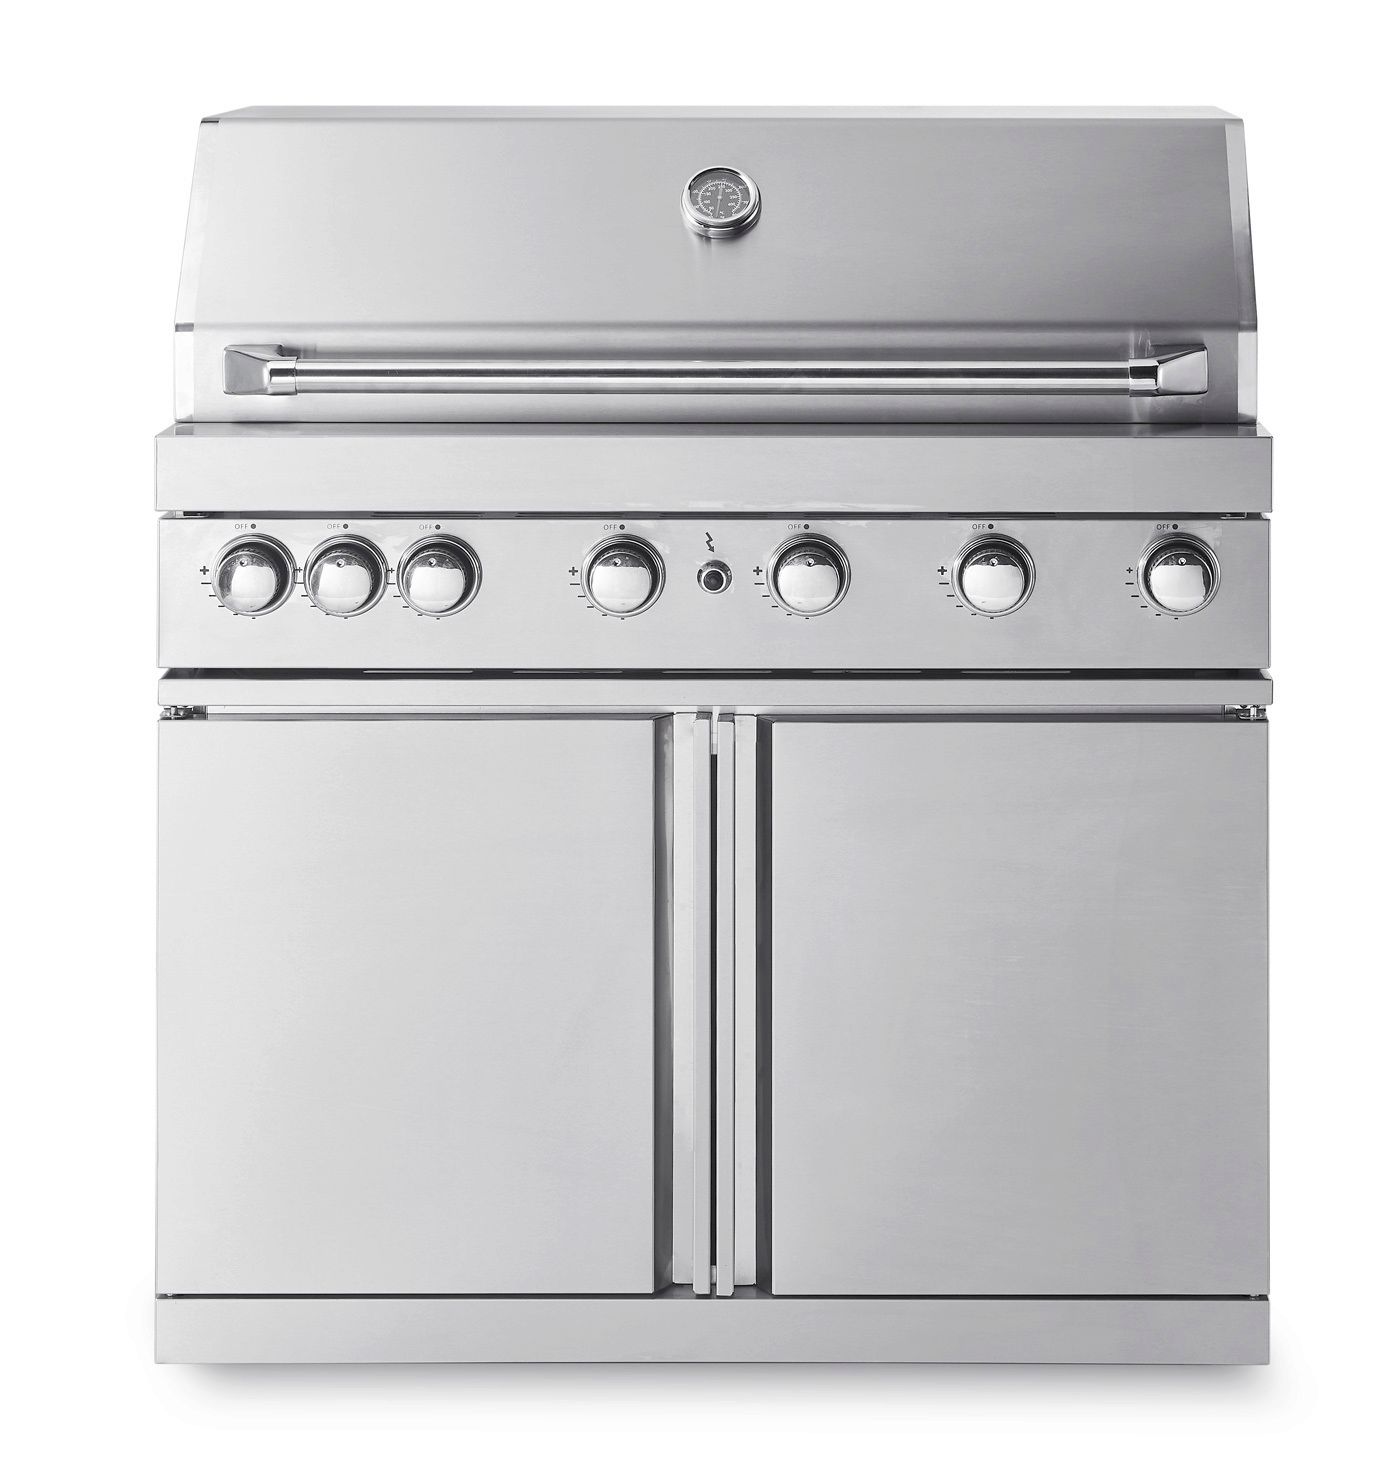 Free-standing gas grill with 6 burners and a side burner